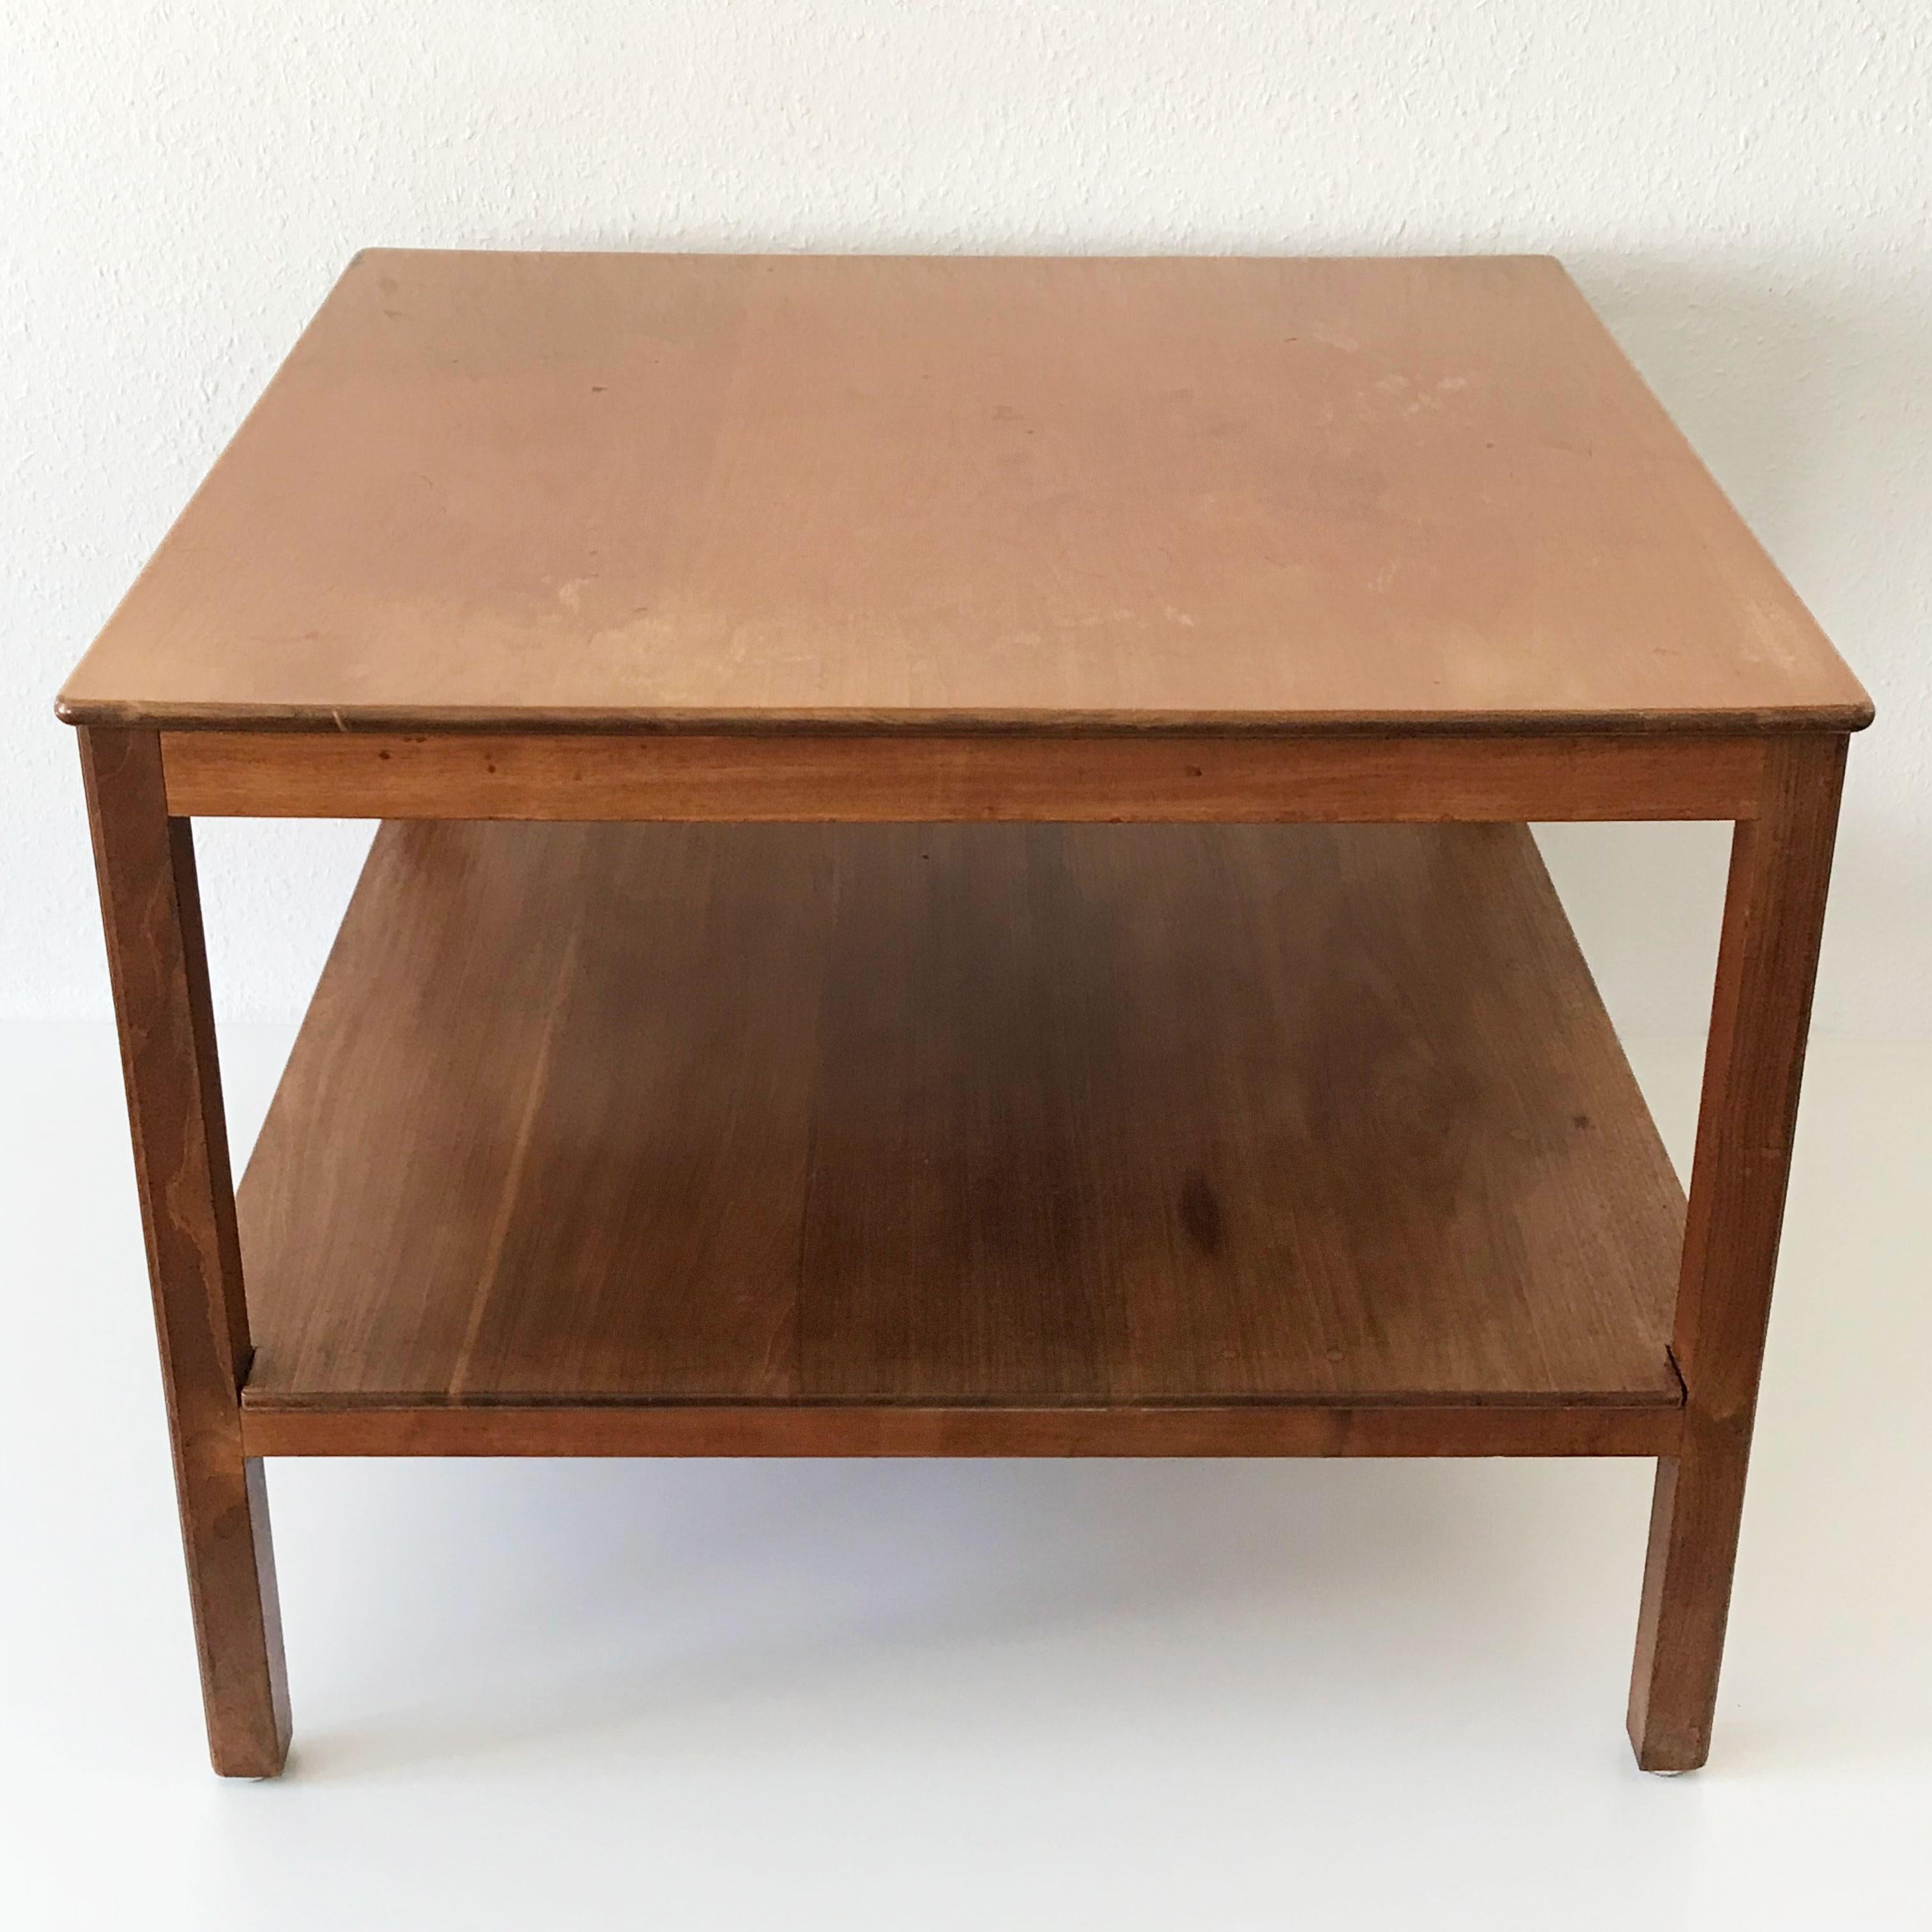 Exceptional coffee table in a minimalistic design by Kaare Klint. 1932. Manufactured by Rud Rasmussen, Copenhagen, Denmark in 1934 (by Rud Rasmussen confirmed).
Makers label under the upper plate.

Executed in Cuban mahogany.

Dimensions:
H 21.07